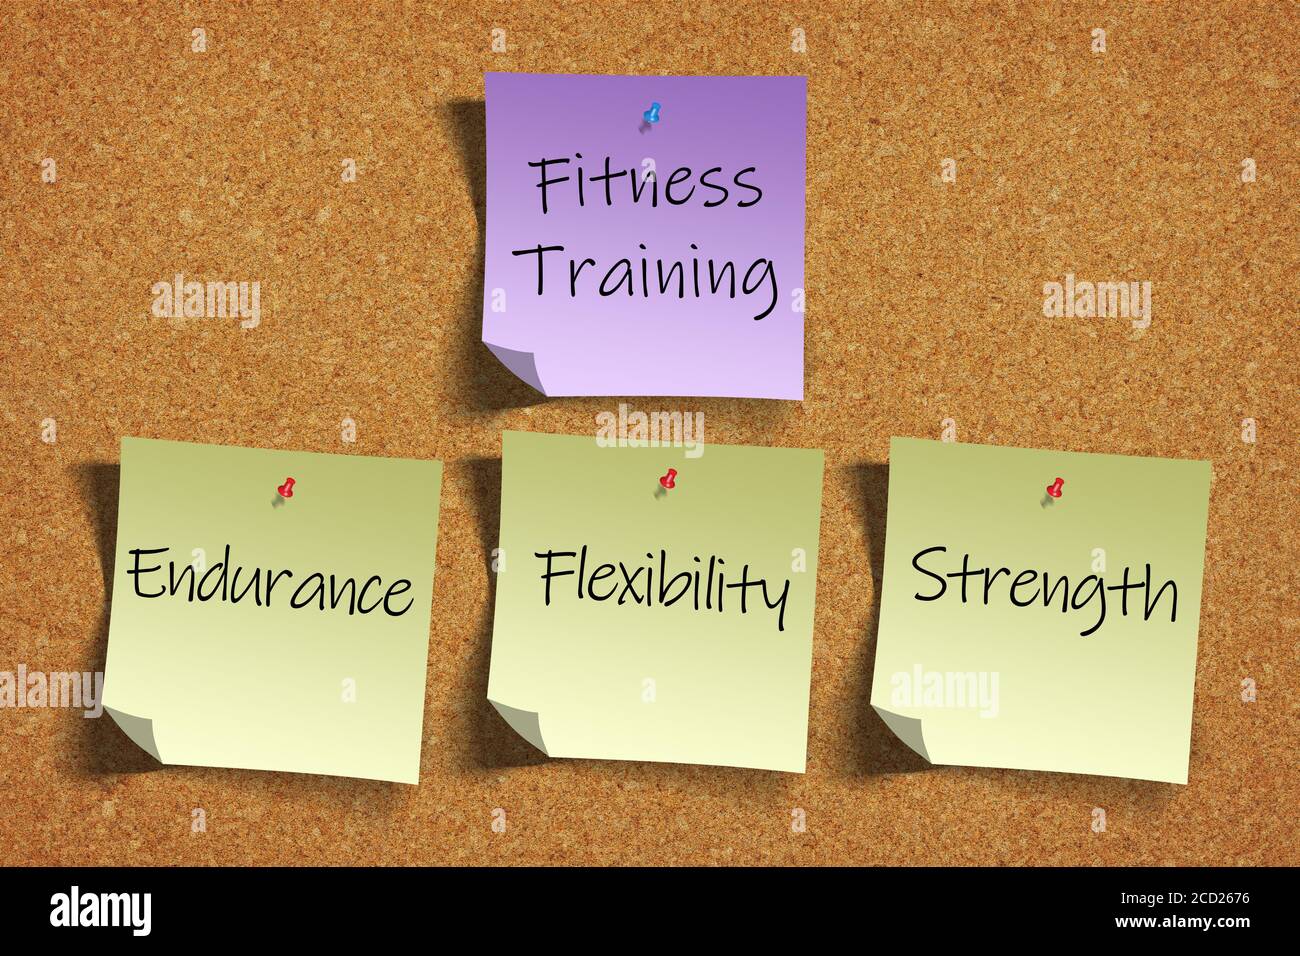 3D rendering of Fitness Training goals or concepts of Endurance, Flexibility, Strength on color sticky notes pinned to cork bulletin board. Stock Photo